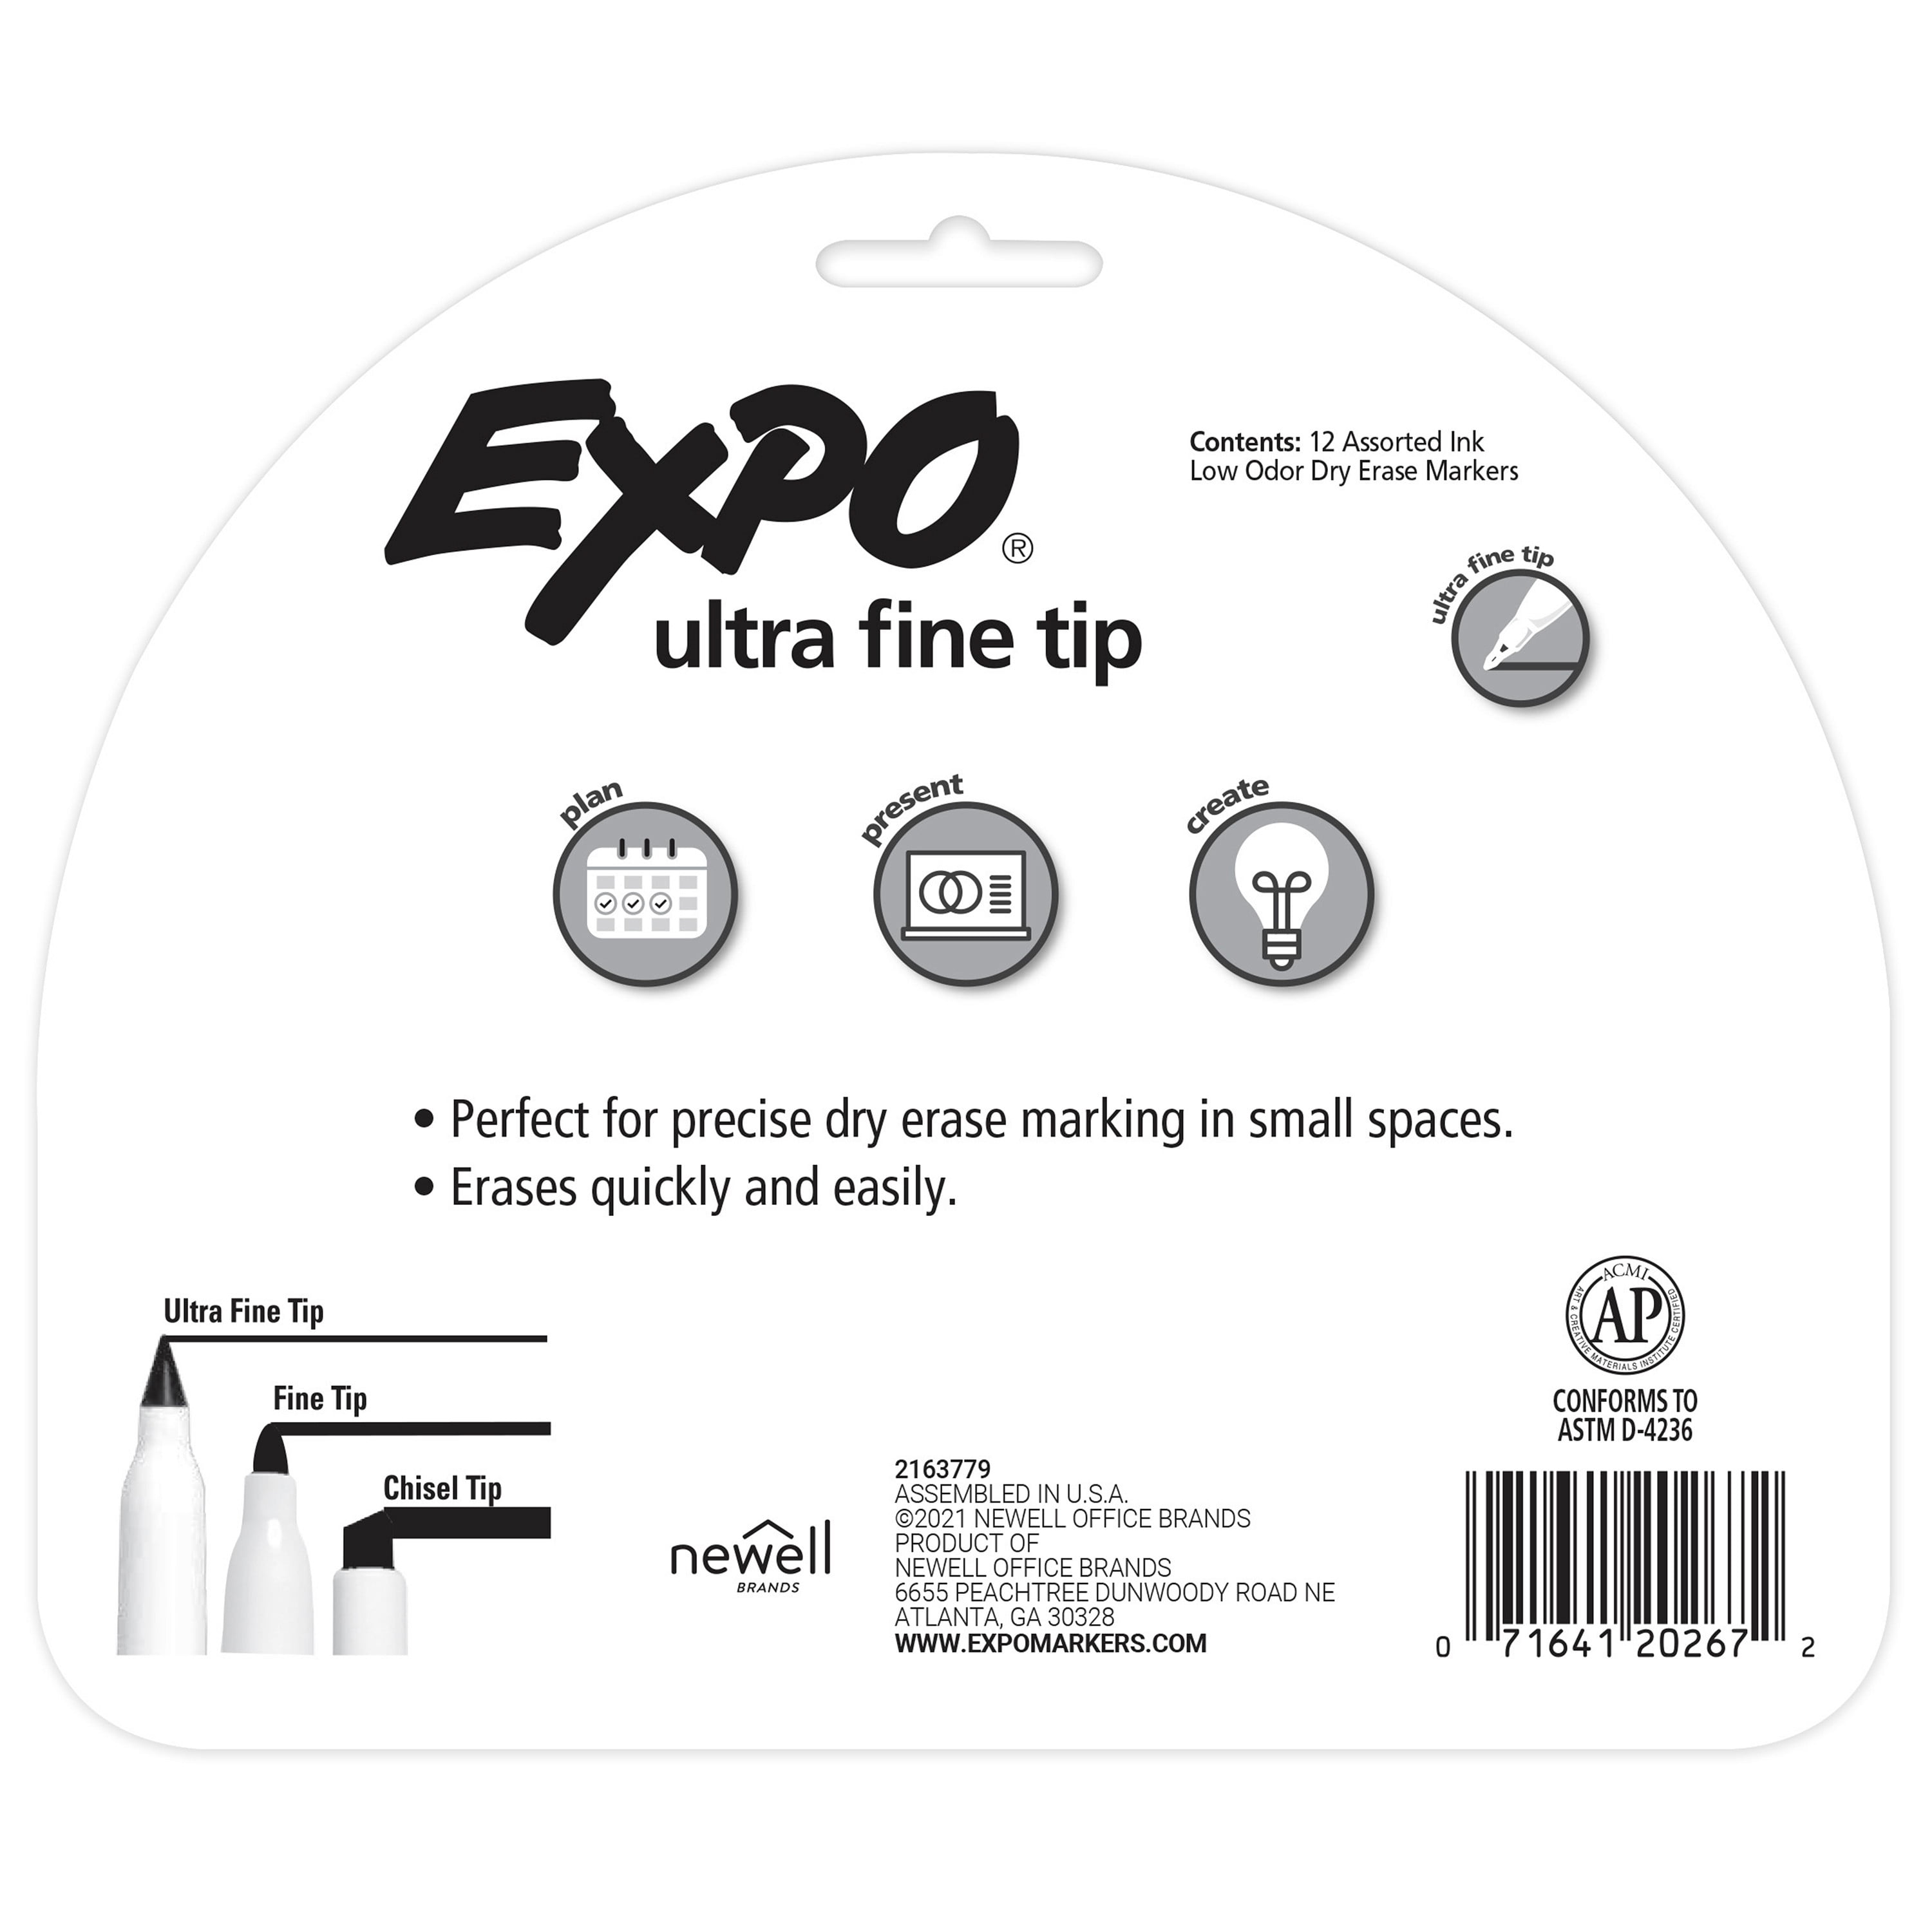 Expo Low Odor Dry Erase Markers, Ultra-Fine Tip, Assorted Colors, 12 Count  